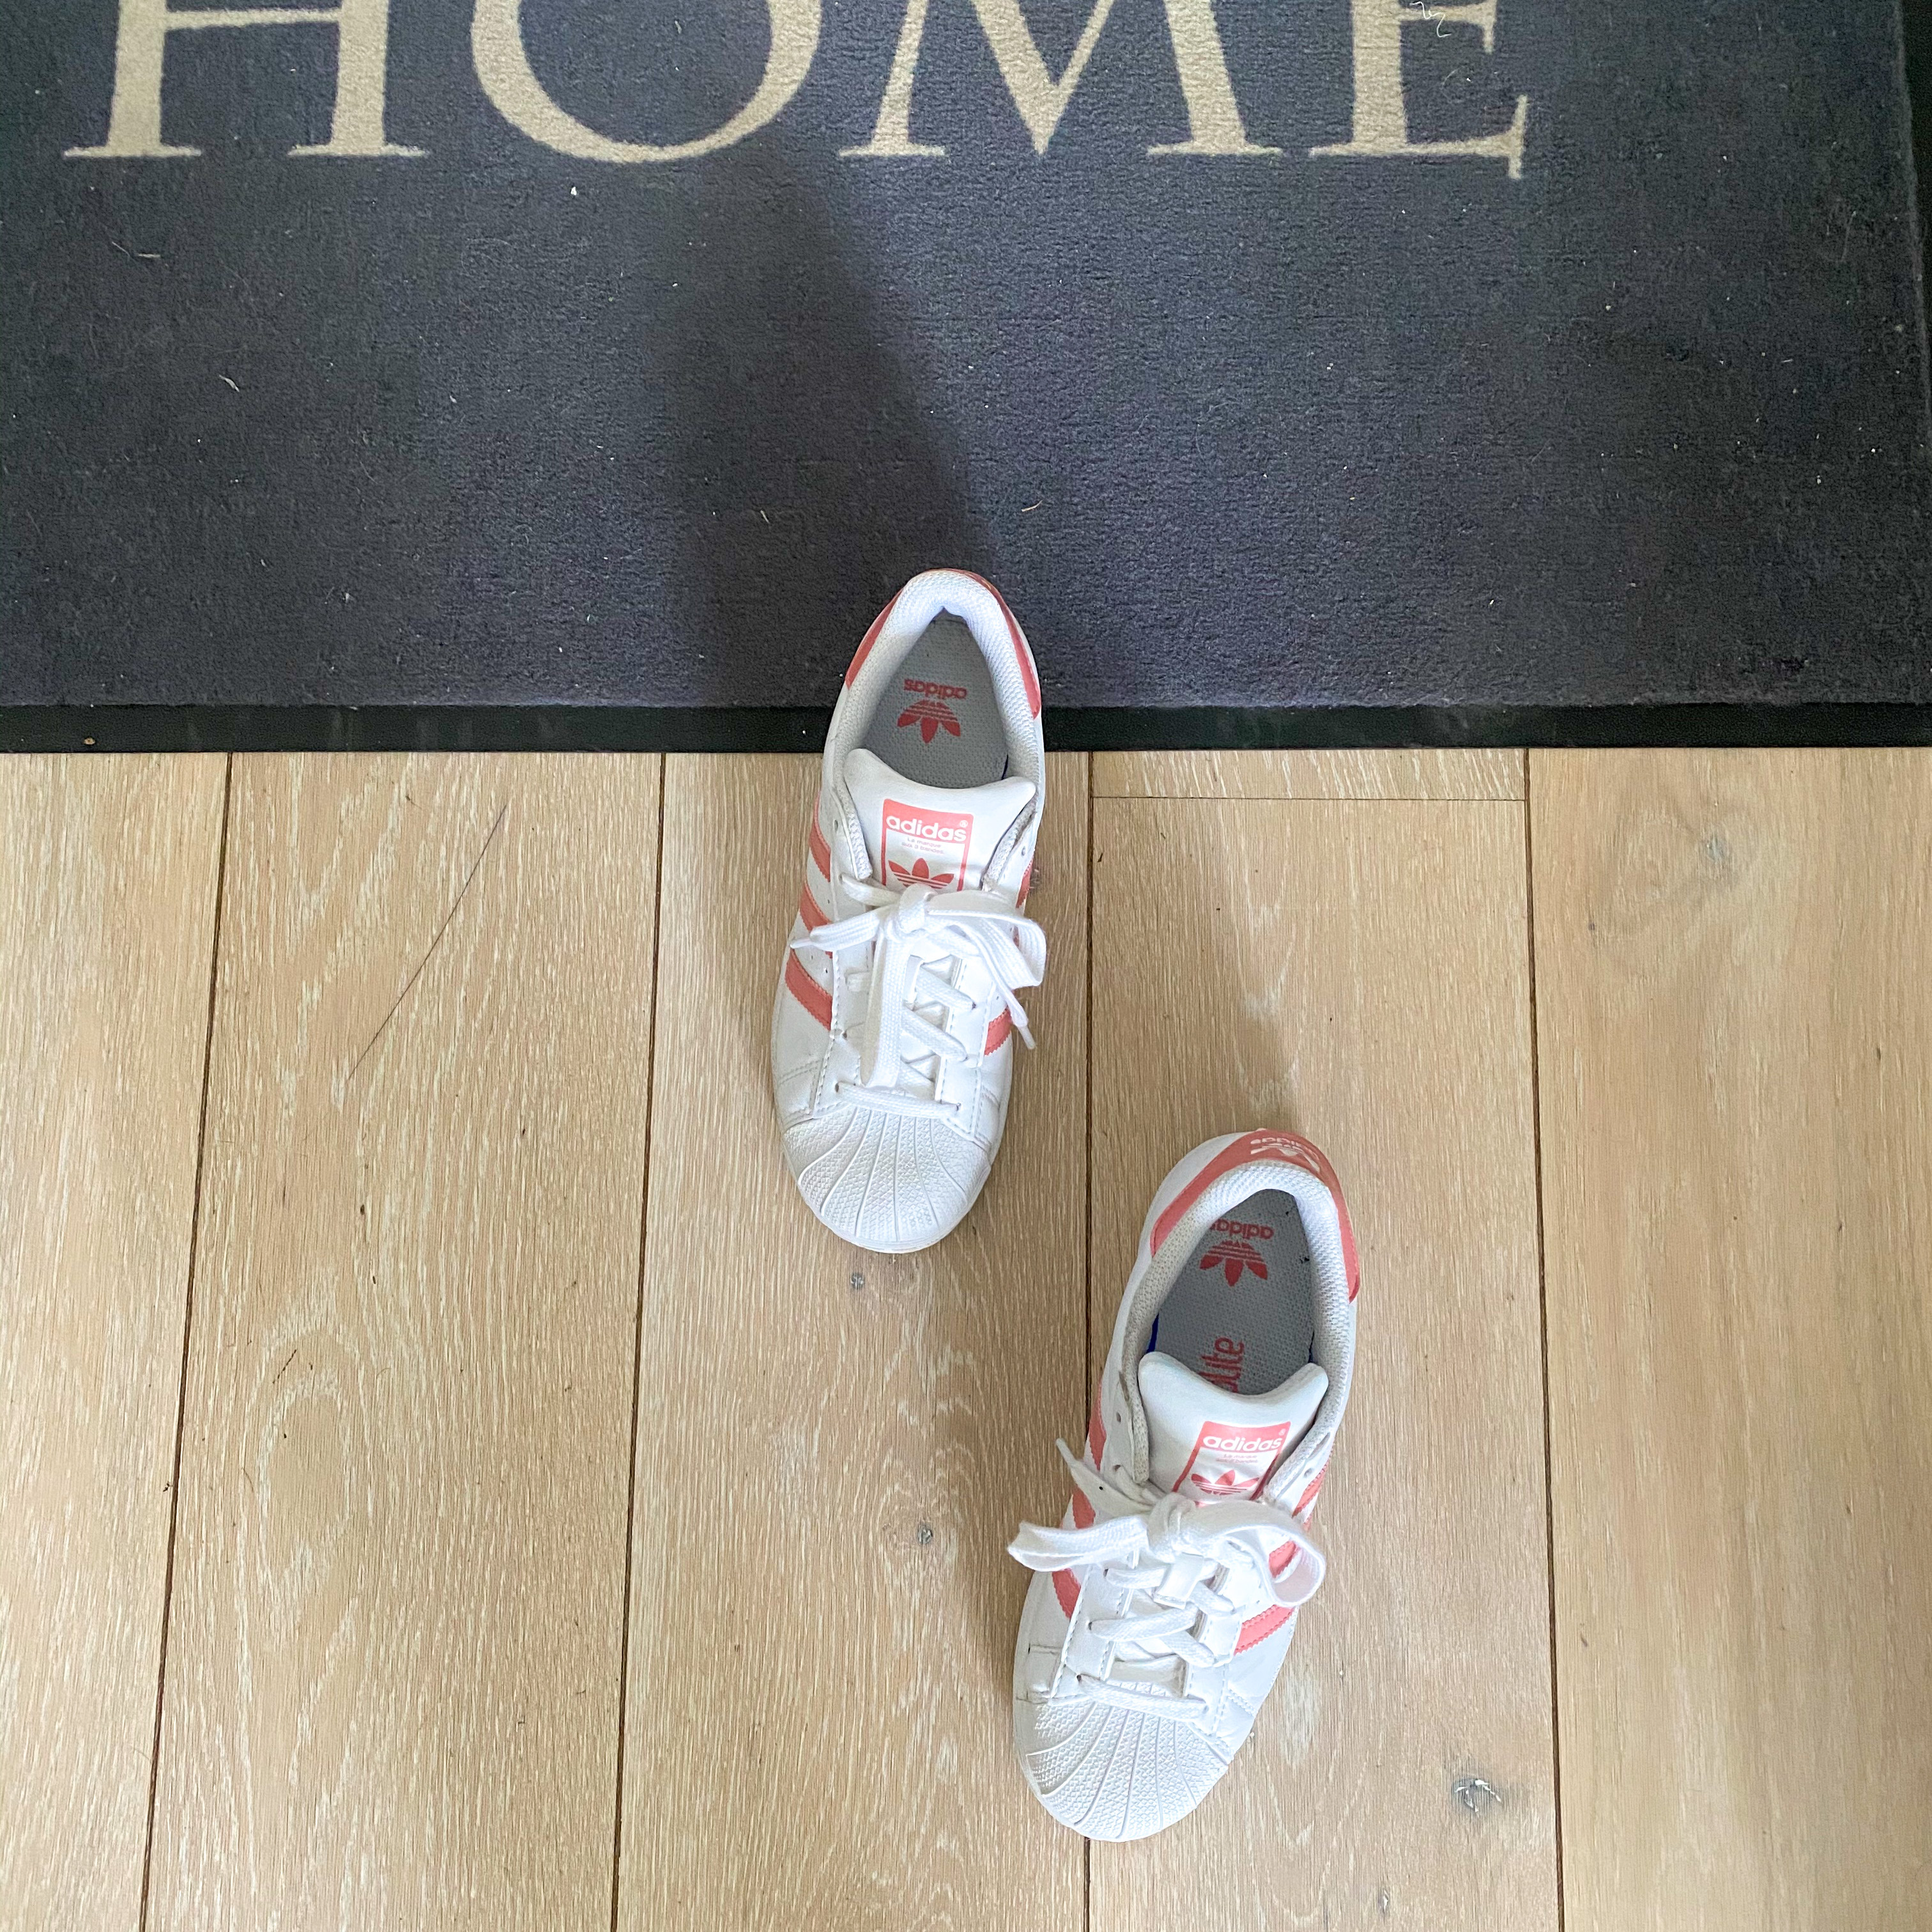 Image of sneakers on welcome home mat; meant to refer to confinement